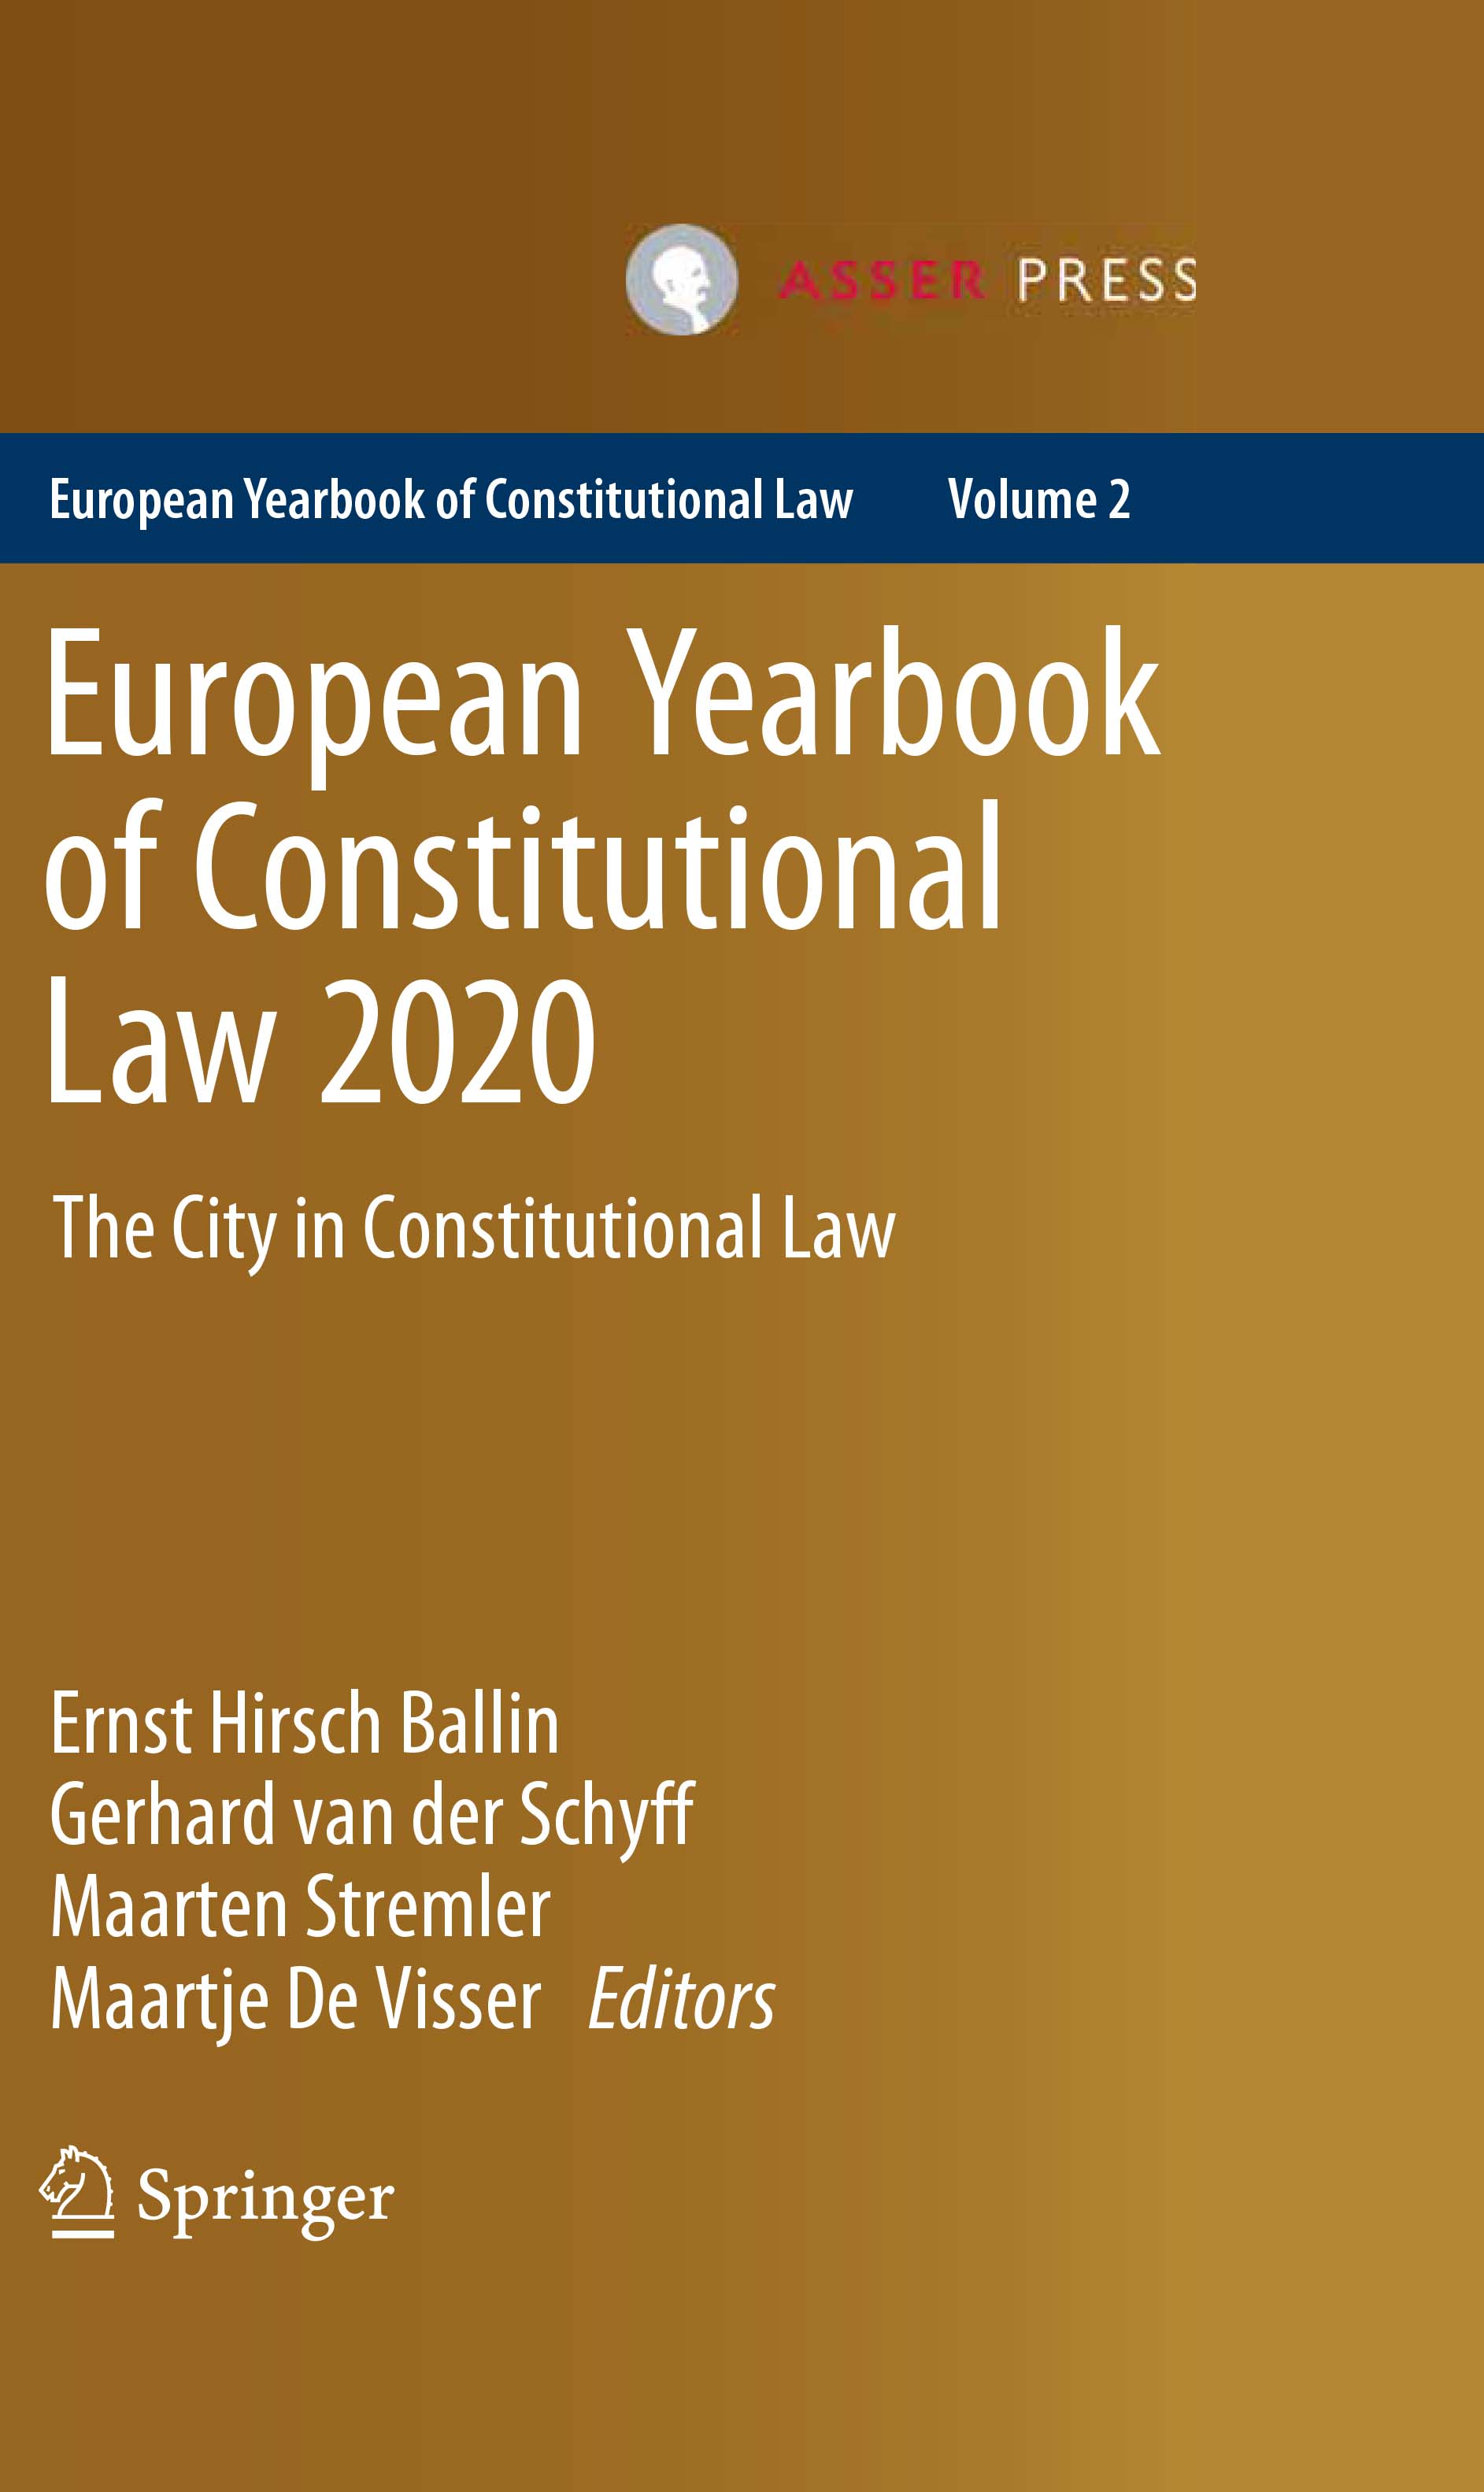 European Yearbook of Constitutional Law 2020 - The City in Constitutional Law